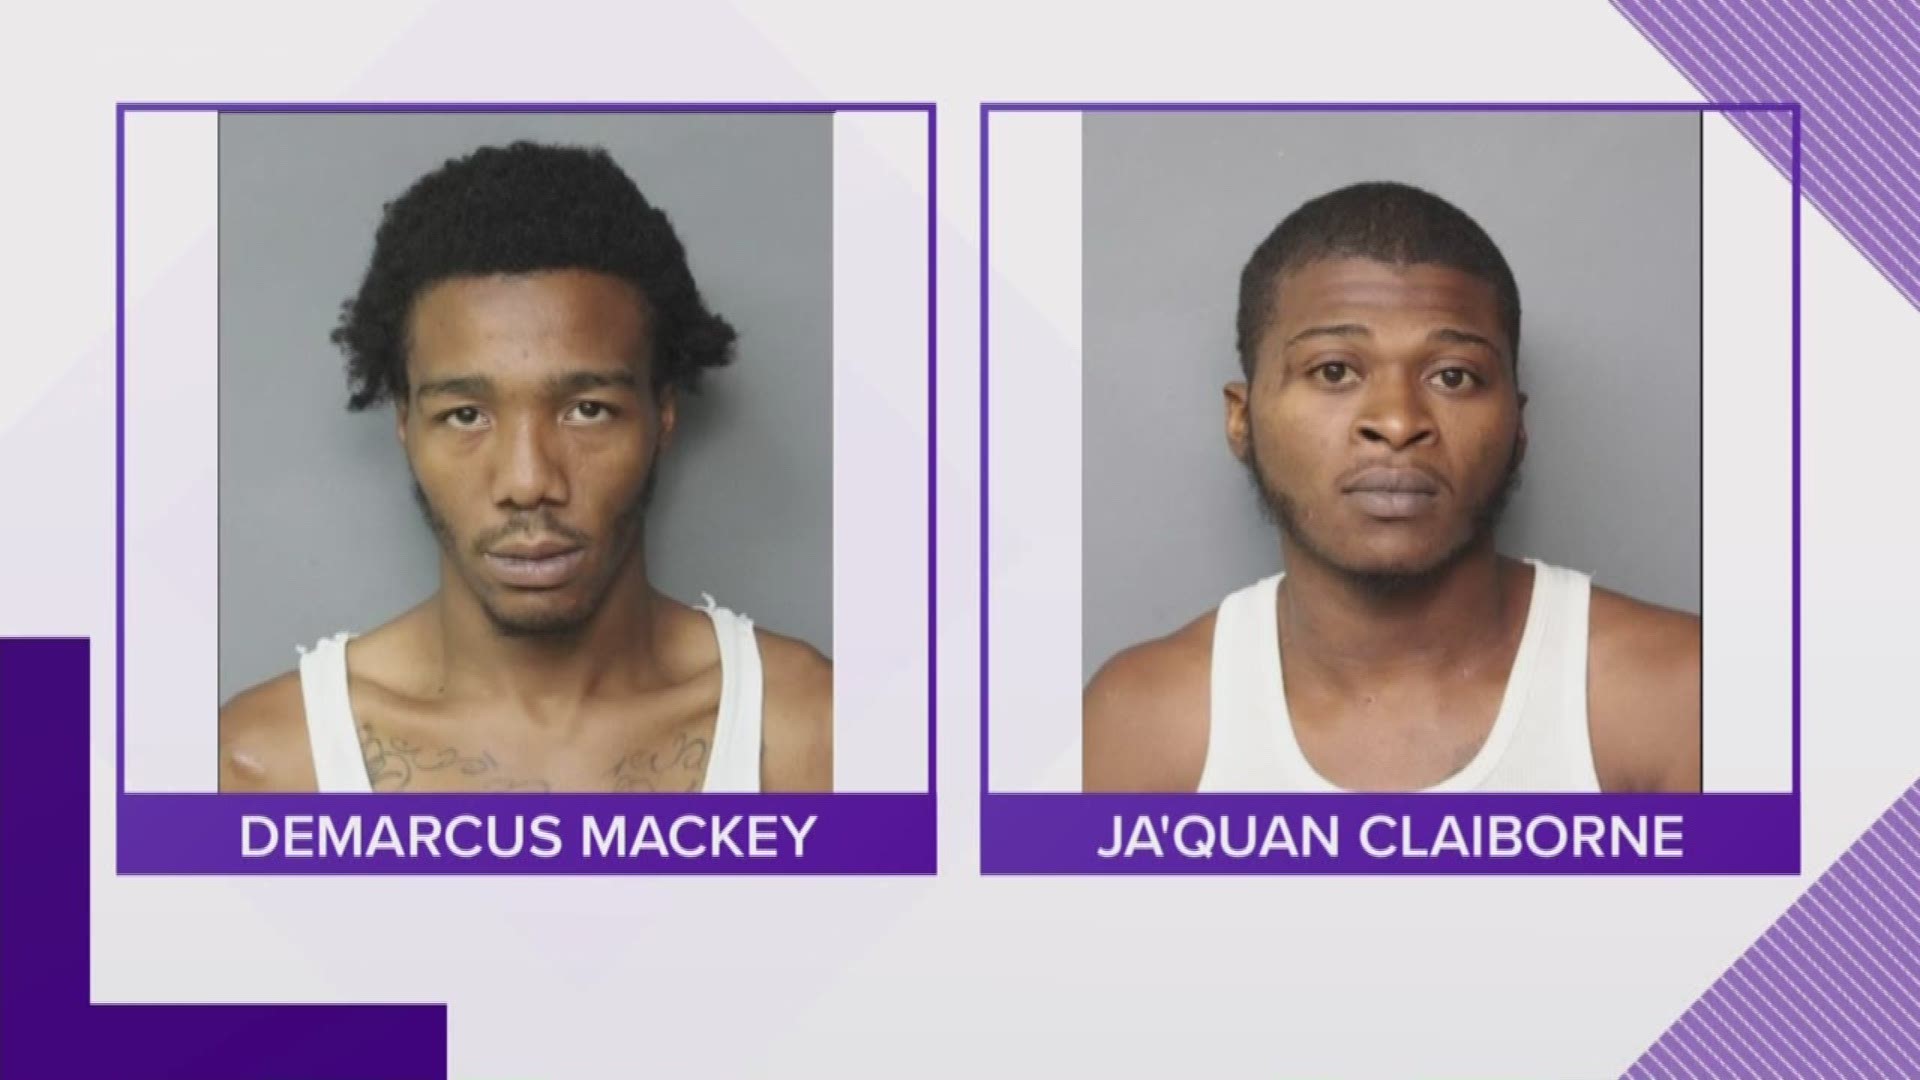 Demarcus Mackey and Ja'quan Claiborne were arrested for a shooting in Norfolk on Keller Avenue that injured a woman and killed a man. Both men face second-degree murder charges.